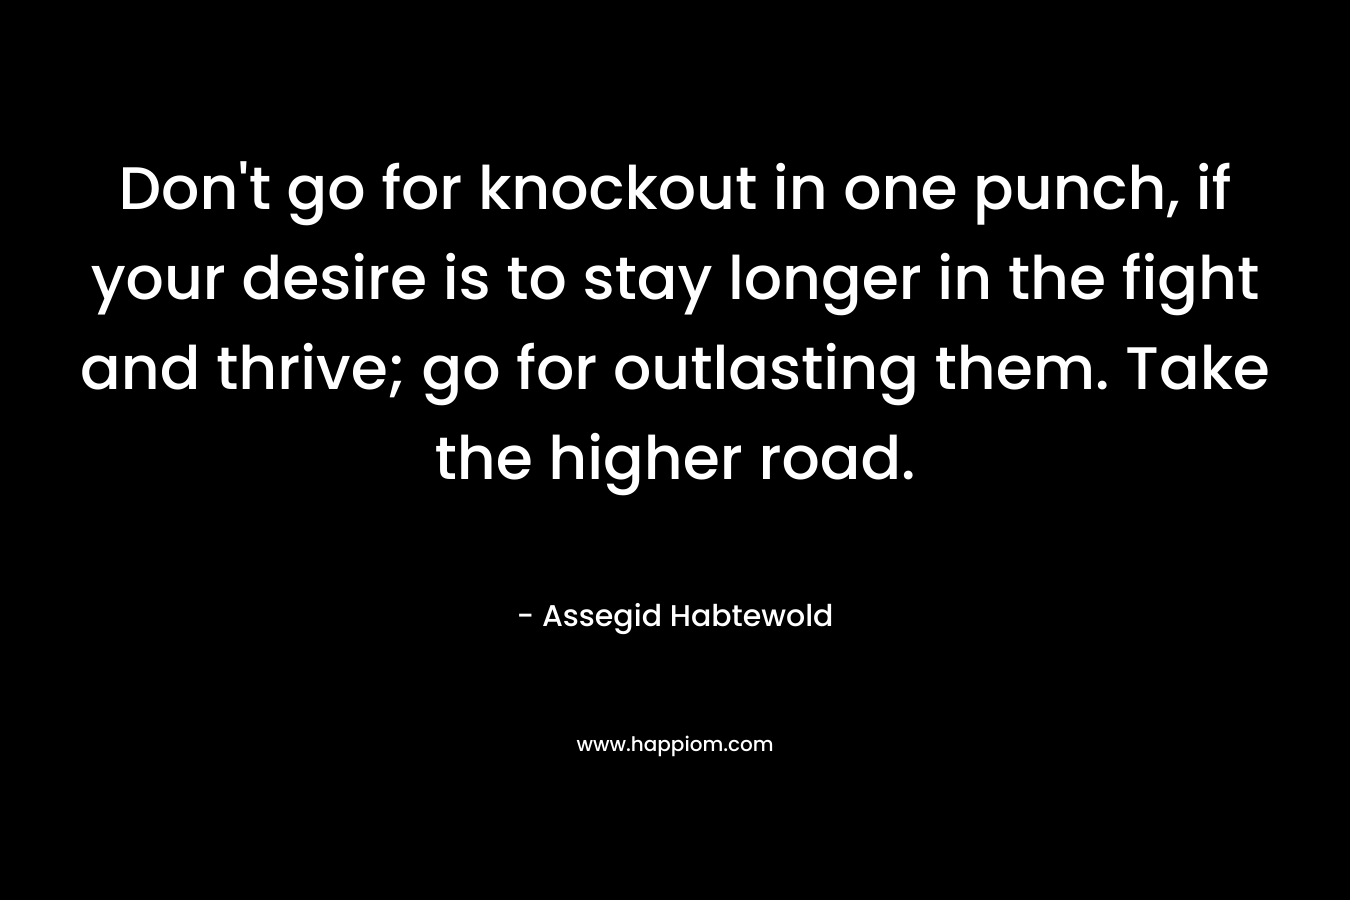 Don’t go for knockout in one punch, if your desire is to stay longer in the fight and thrive; go for outlasting them. Take the higher road. – Assegid Habtewold